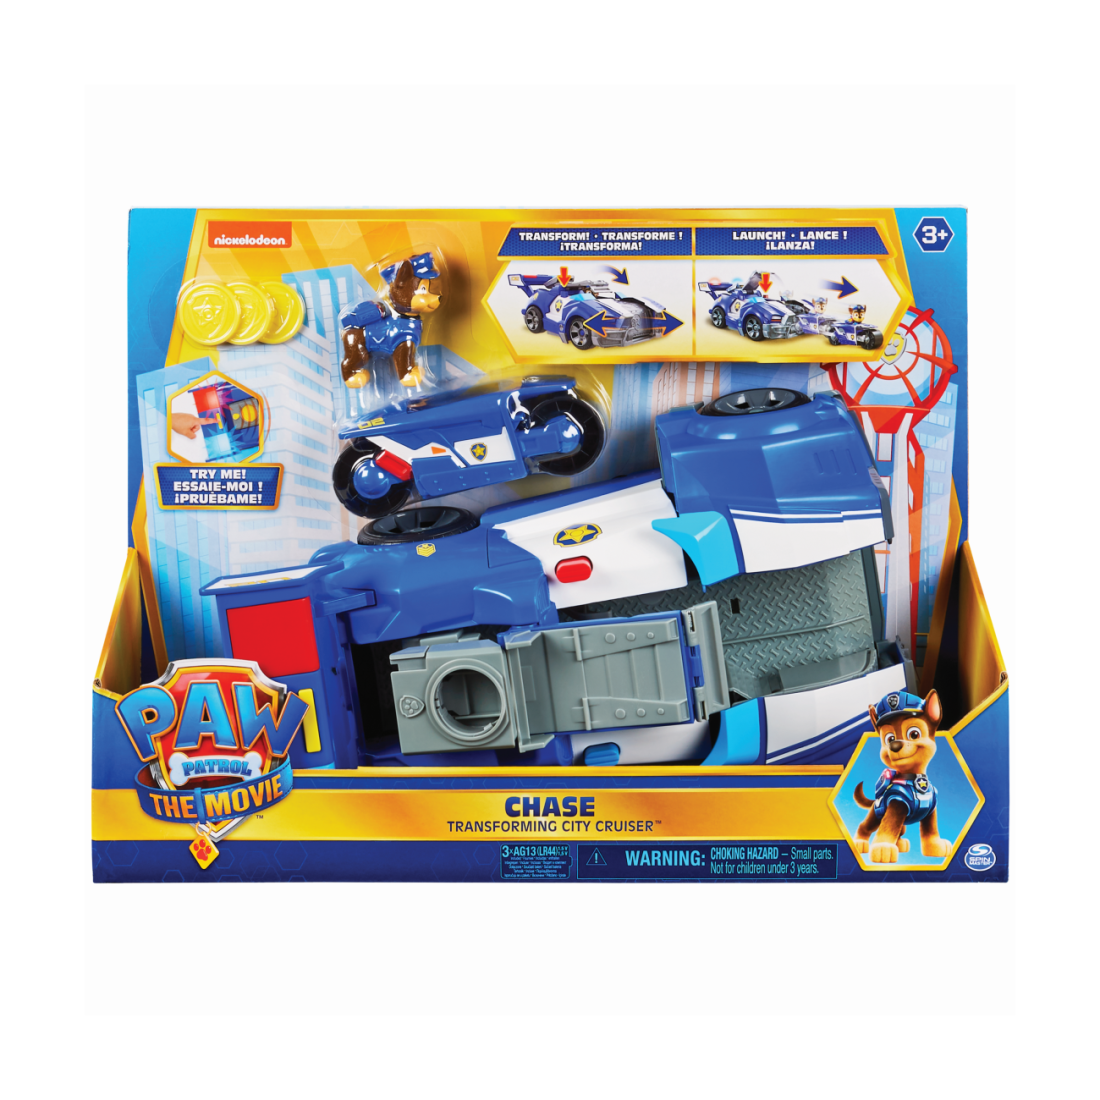 Spin Master Paw Patrol - The Movie - Transforming City Cruiser - Chase